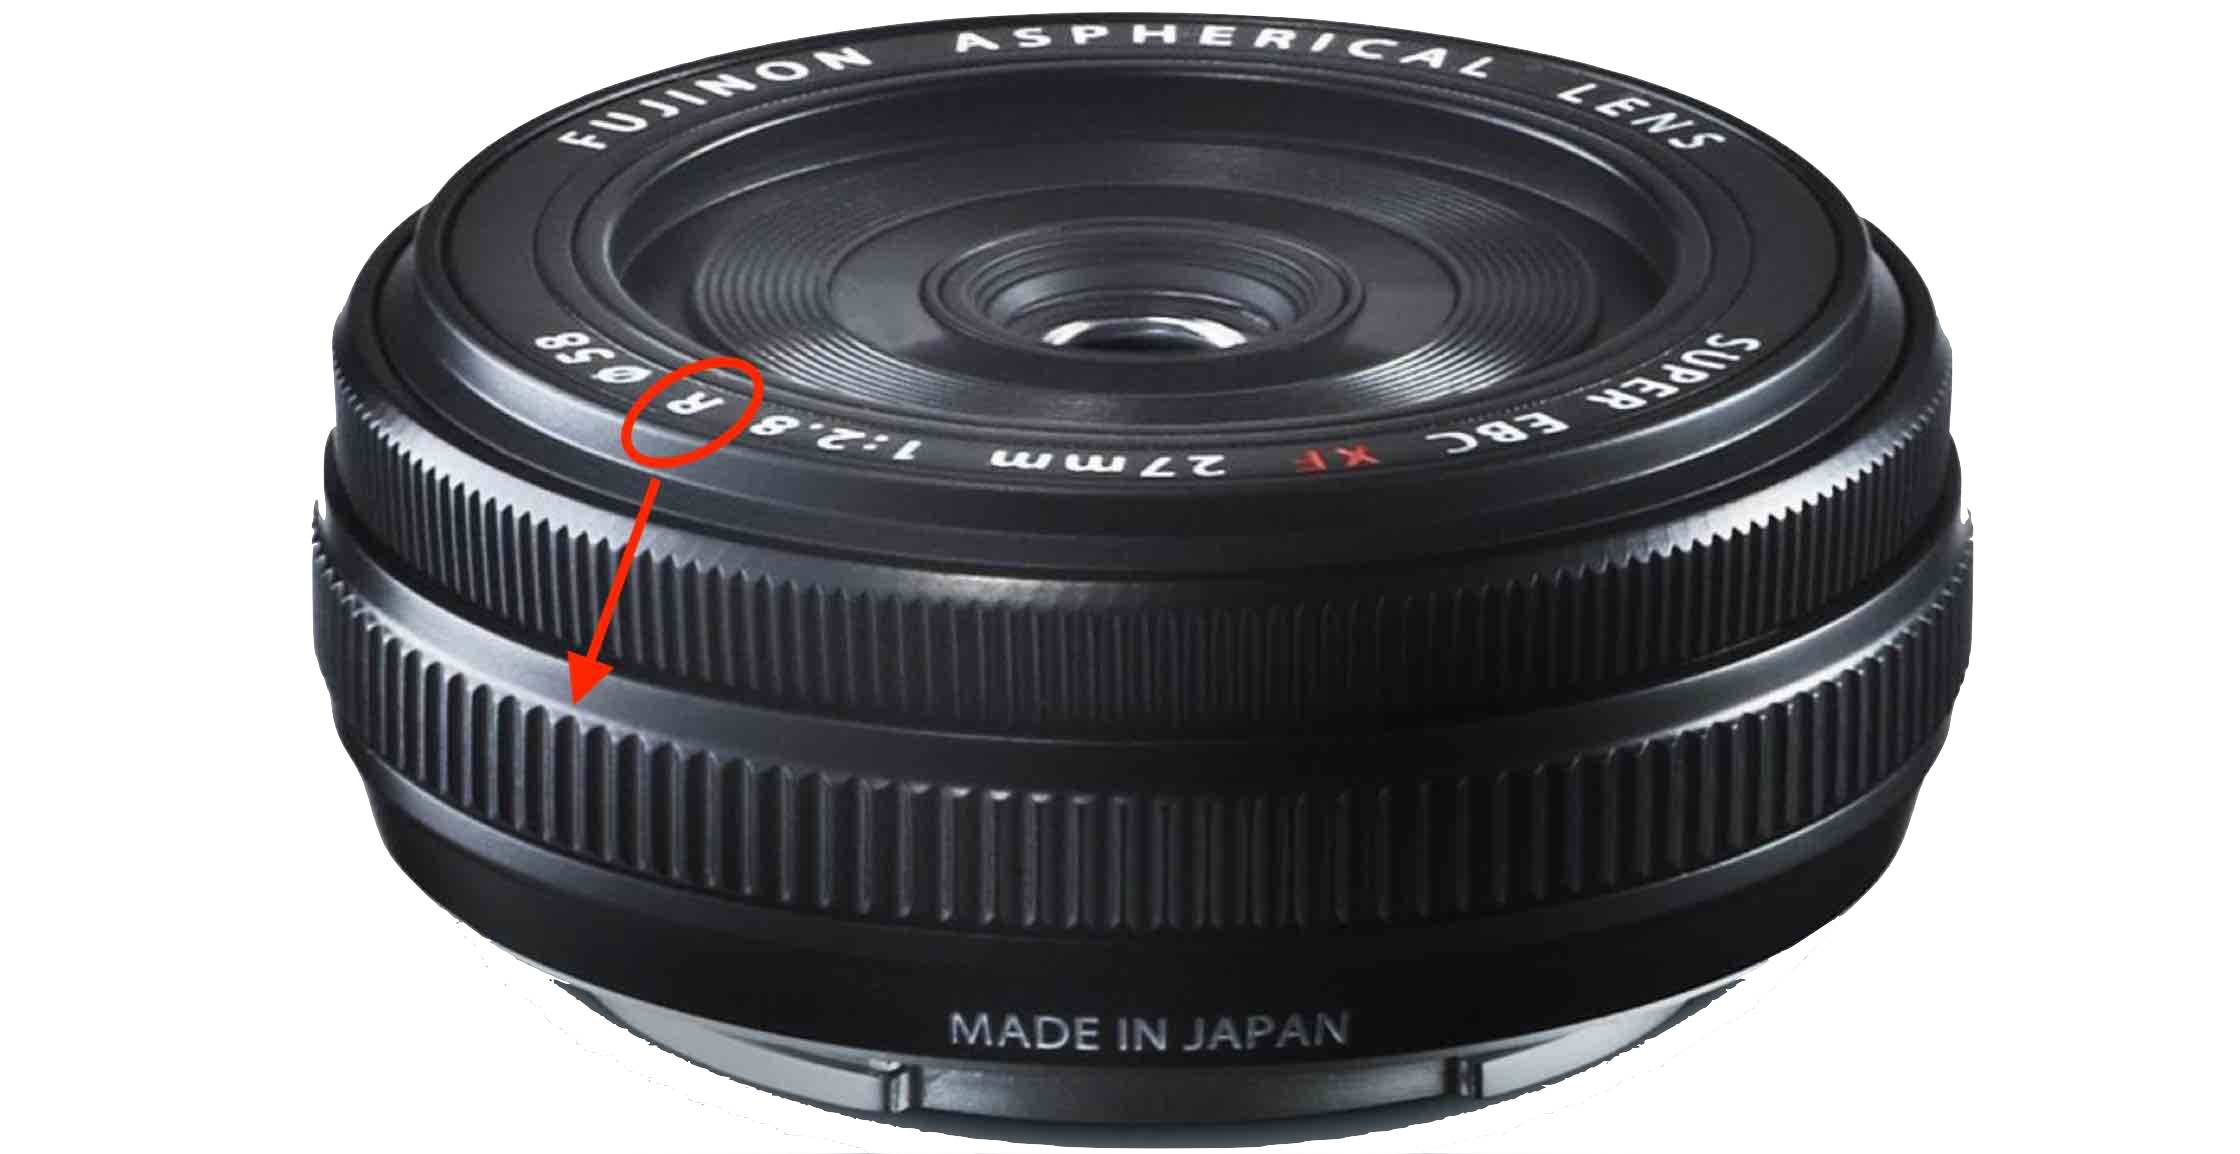 Ronde bal Panter Fujinon XF 27mm f/2.8 R with Aperture Ring Listed at Some Stores: A Dream  Come True or a Sweet Illusion? - Fuji Rumors